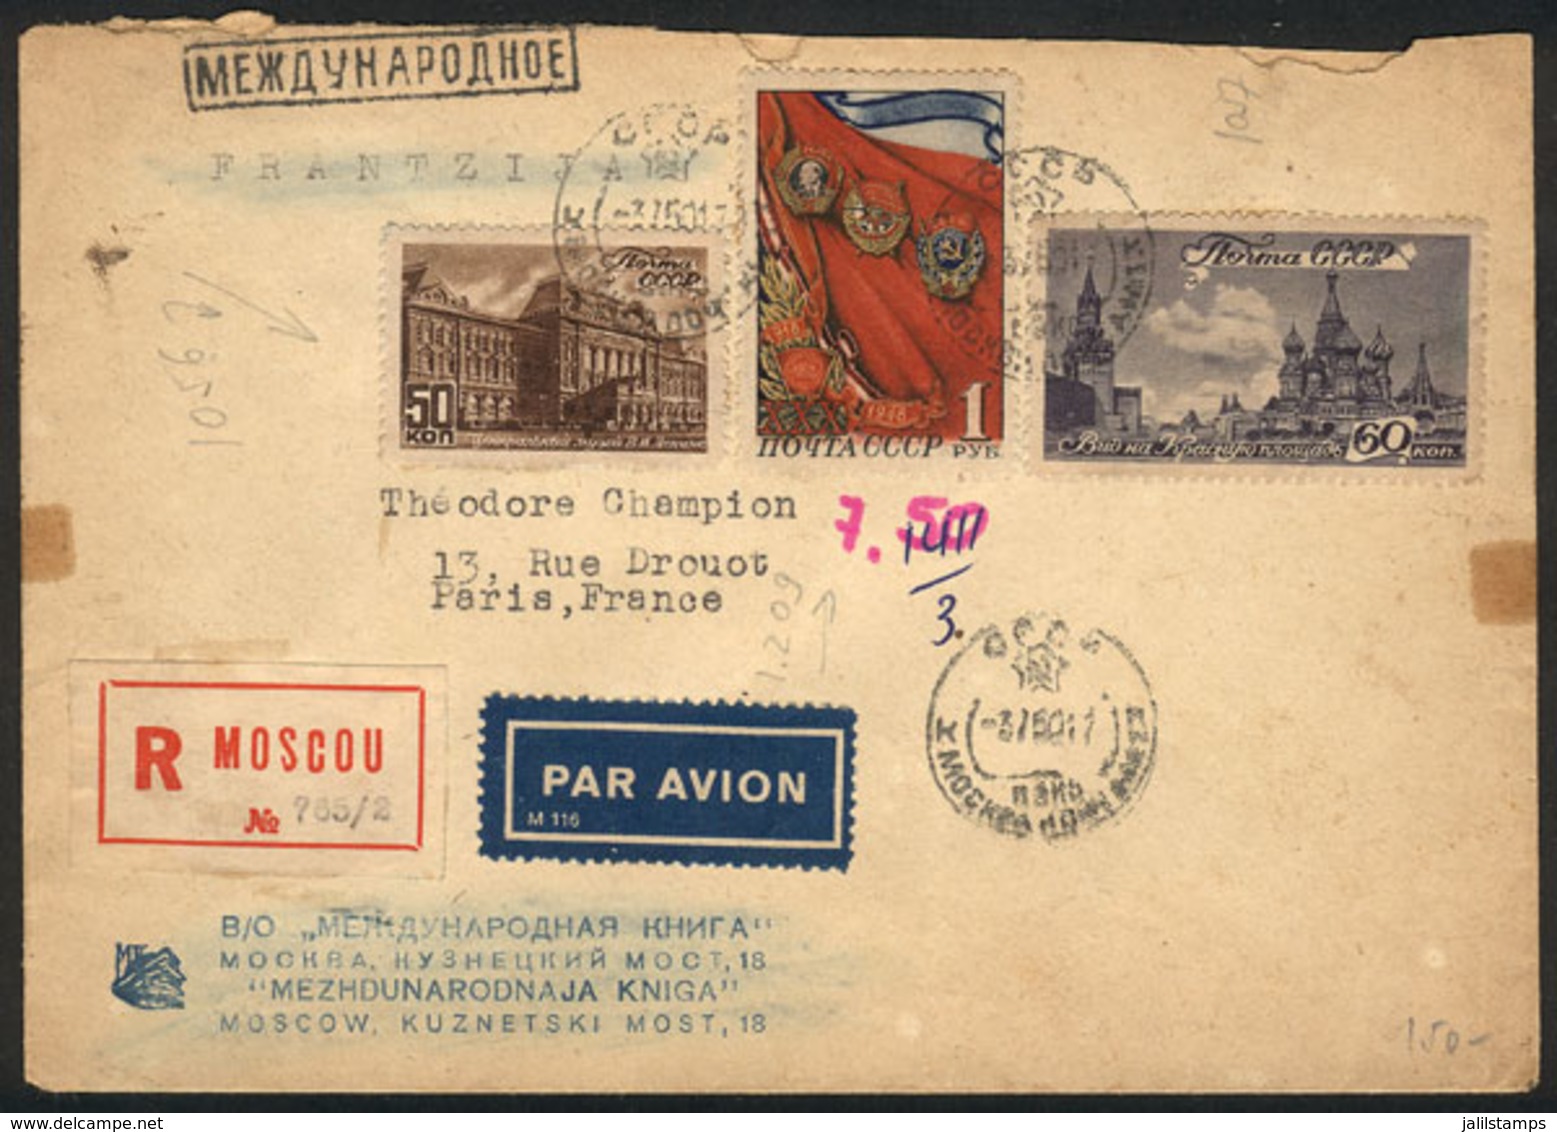 RUSSIA: Registered Cover Sent From Moscow To Paris, Nice Postage! - Storia Postale